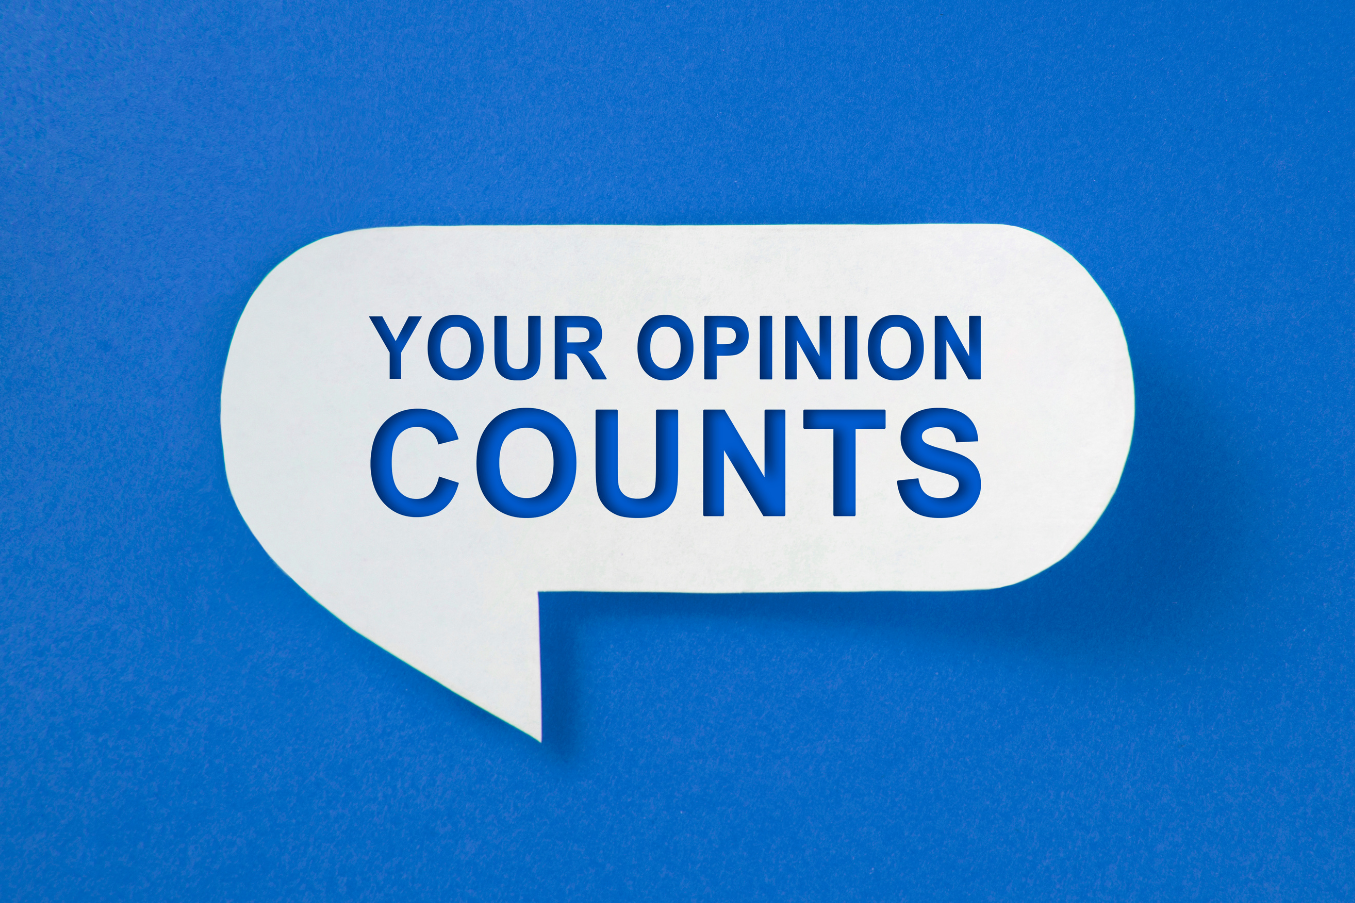 A speech bubble appears with the words "your opinion counts"